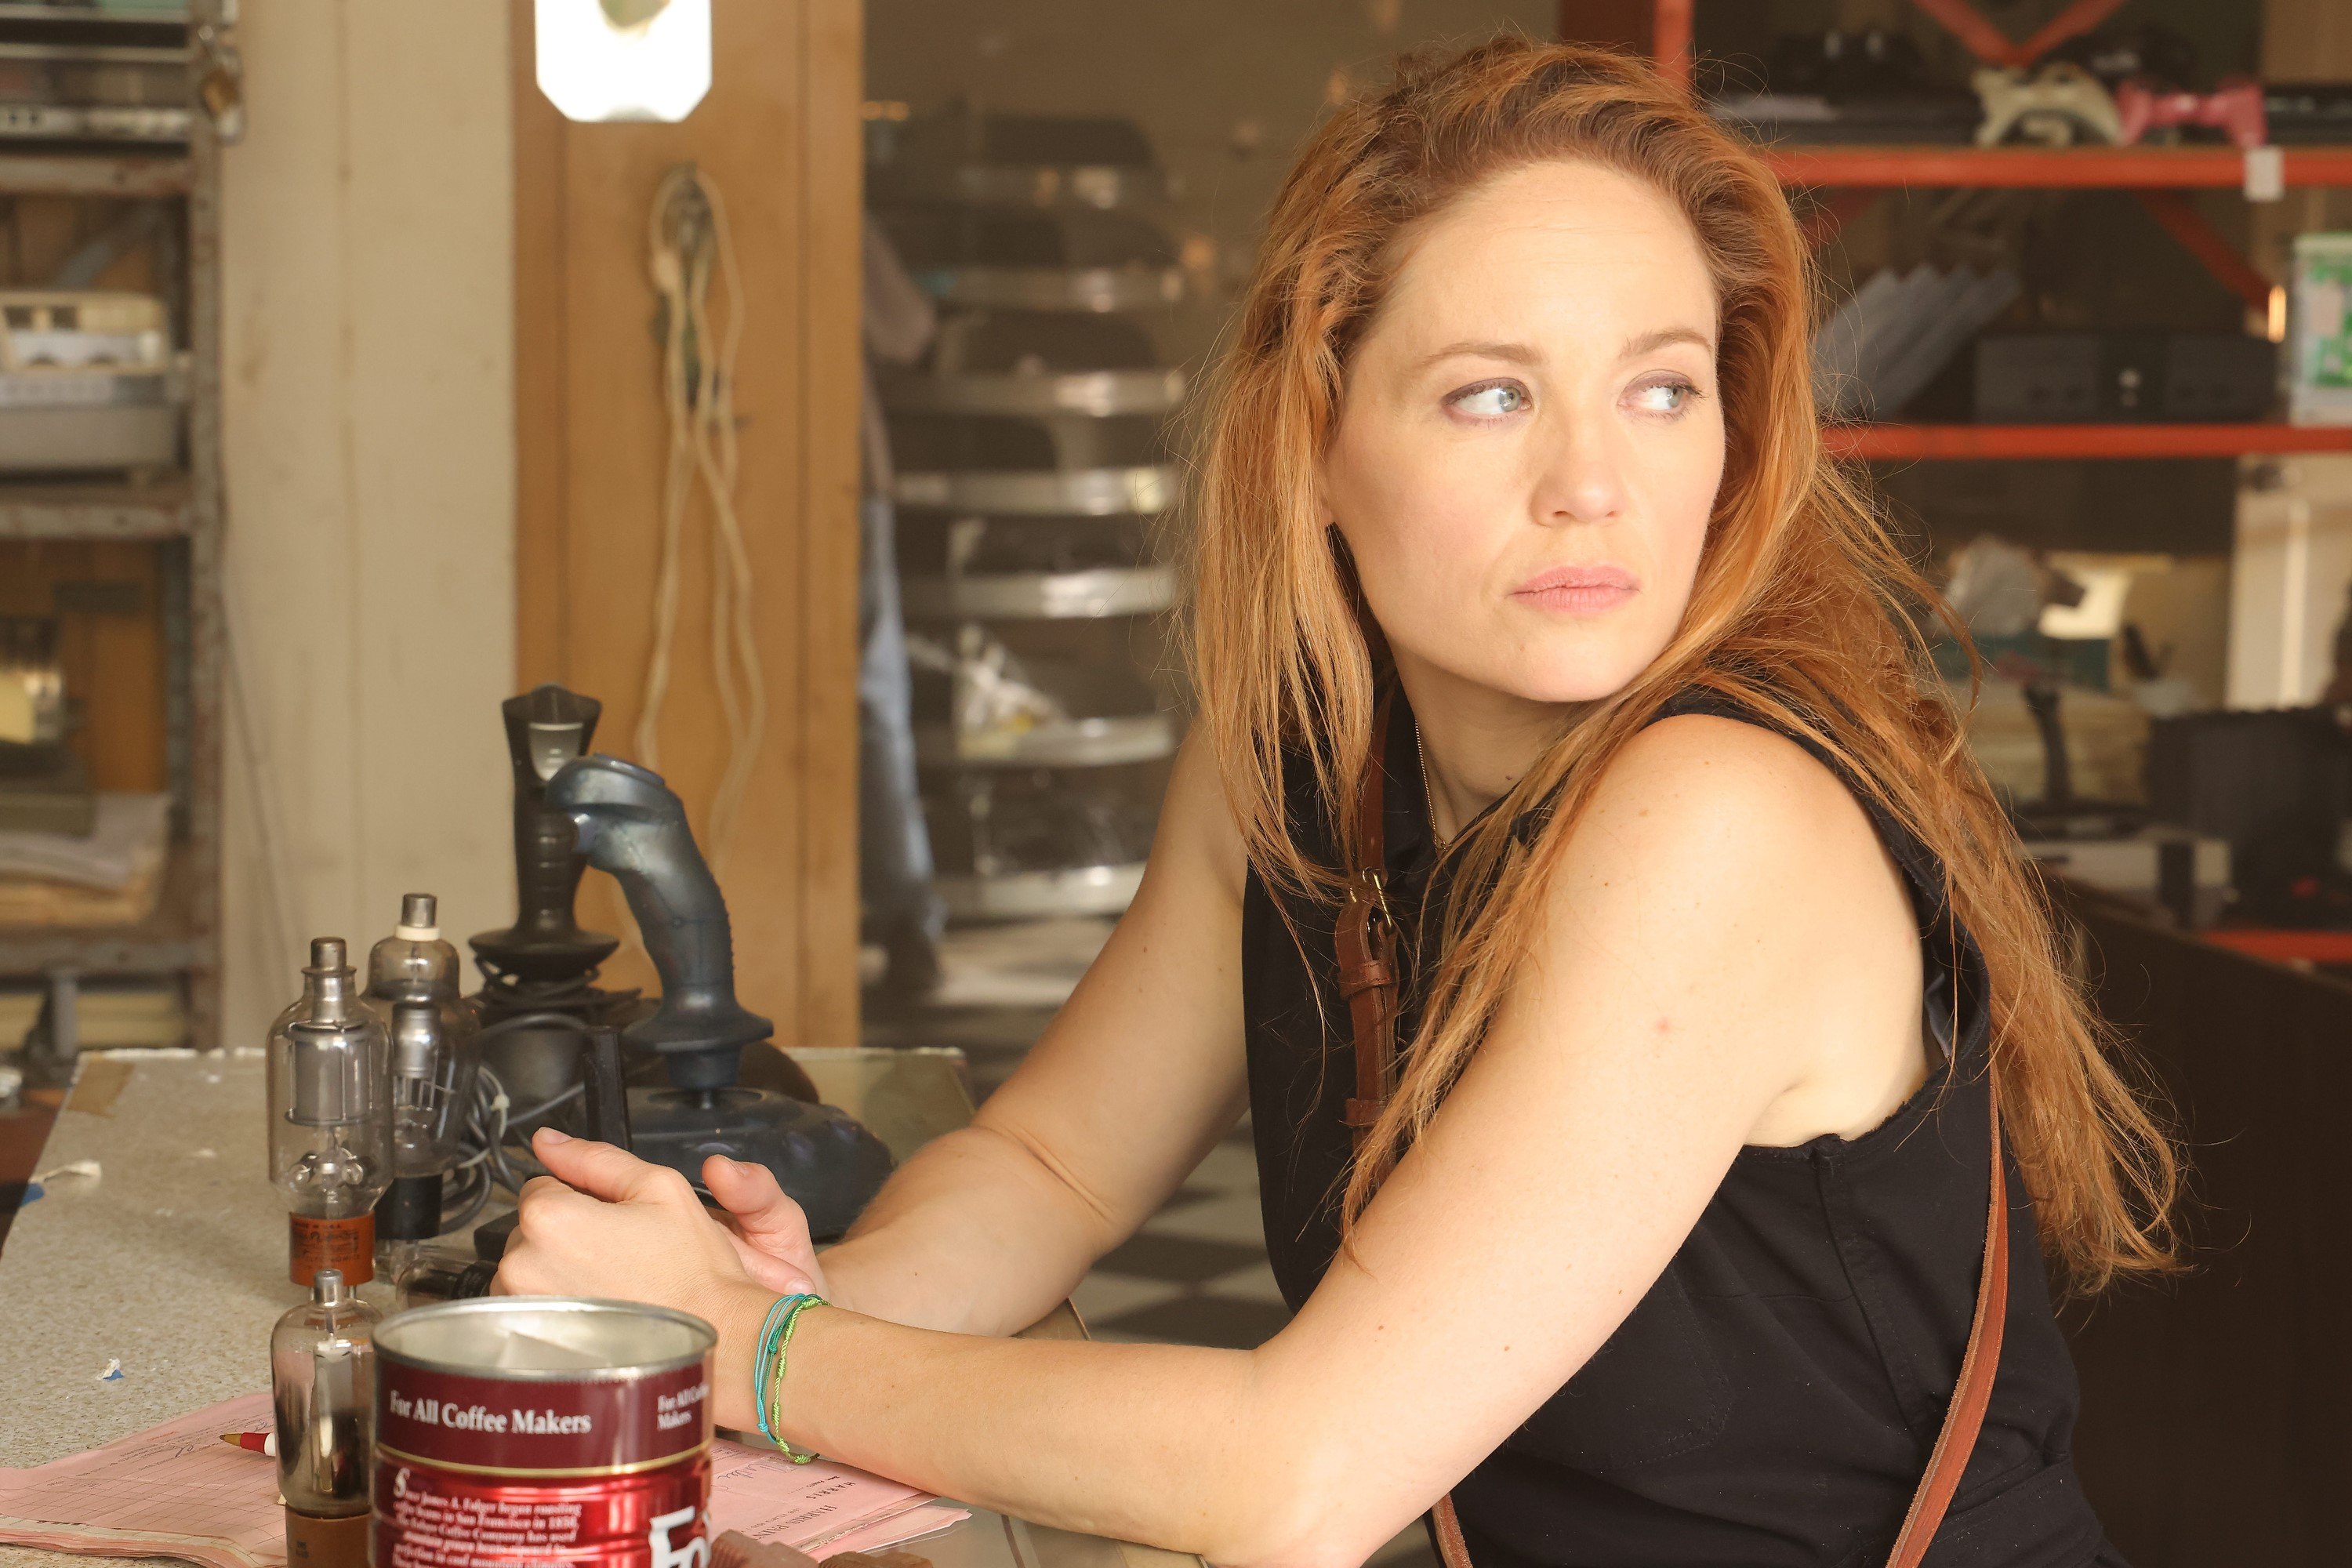 Erika Christensen, in character as Angie Polaski in 'Will Trent' on ABC, wears a black tank top.